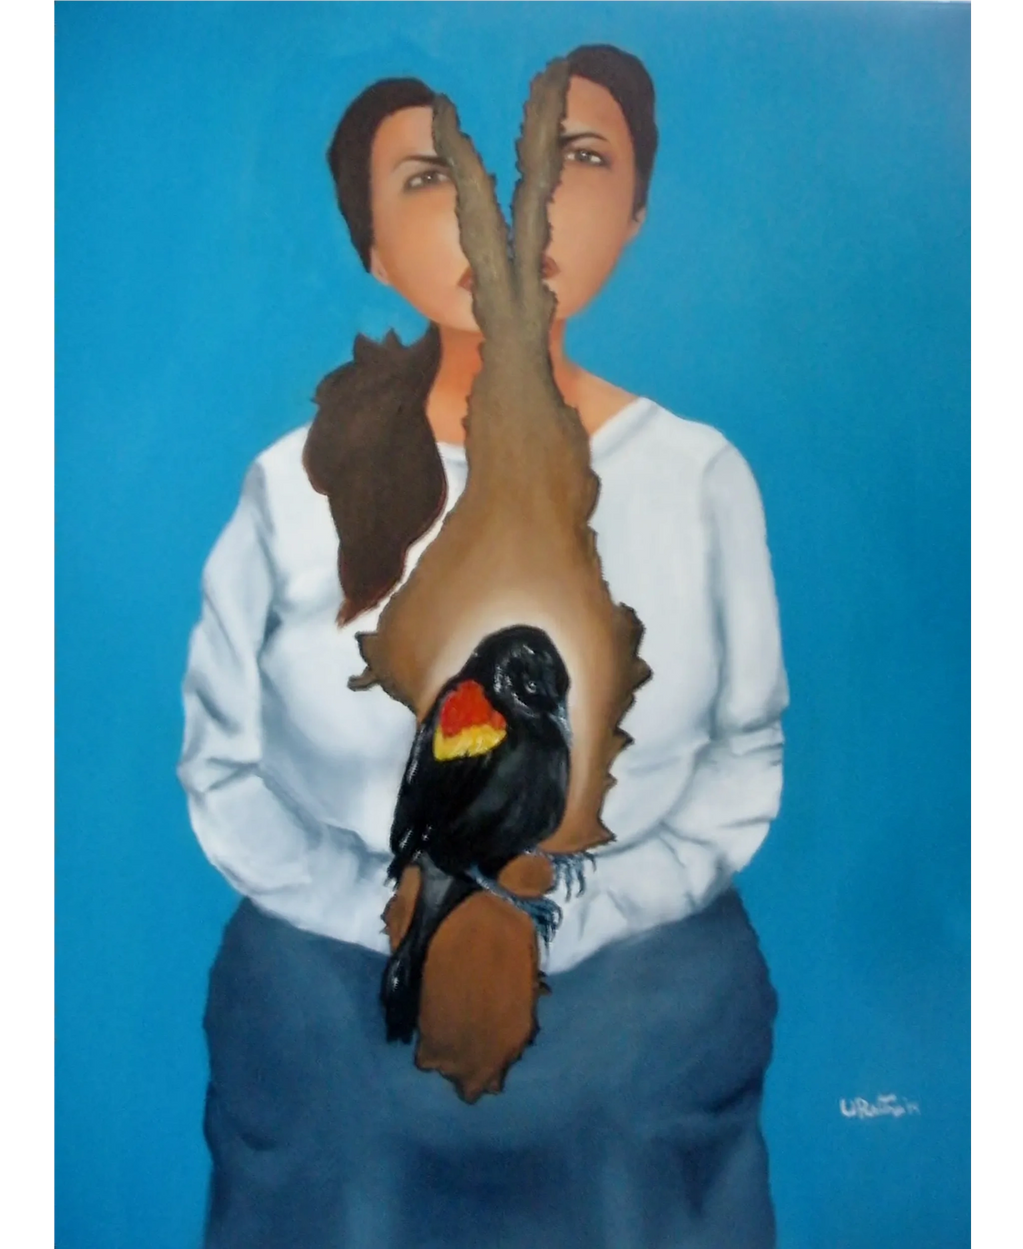 Latina woman seated ripped down center red-winged black bird in center cerulean blue background 